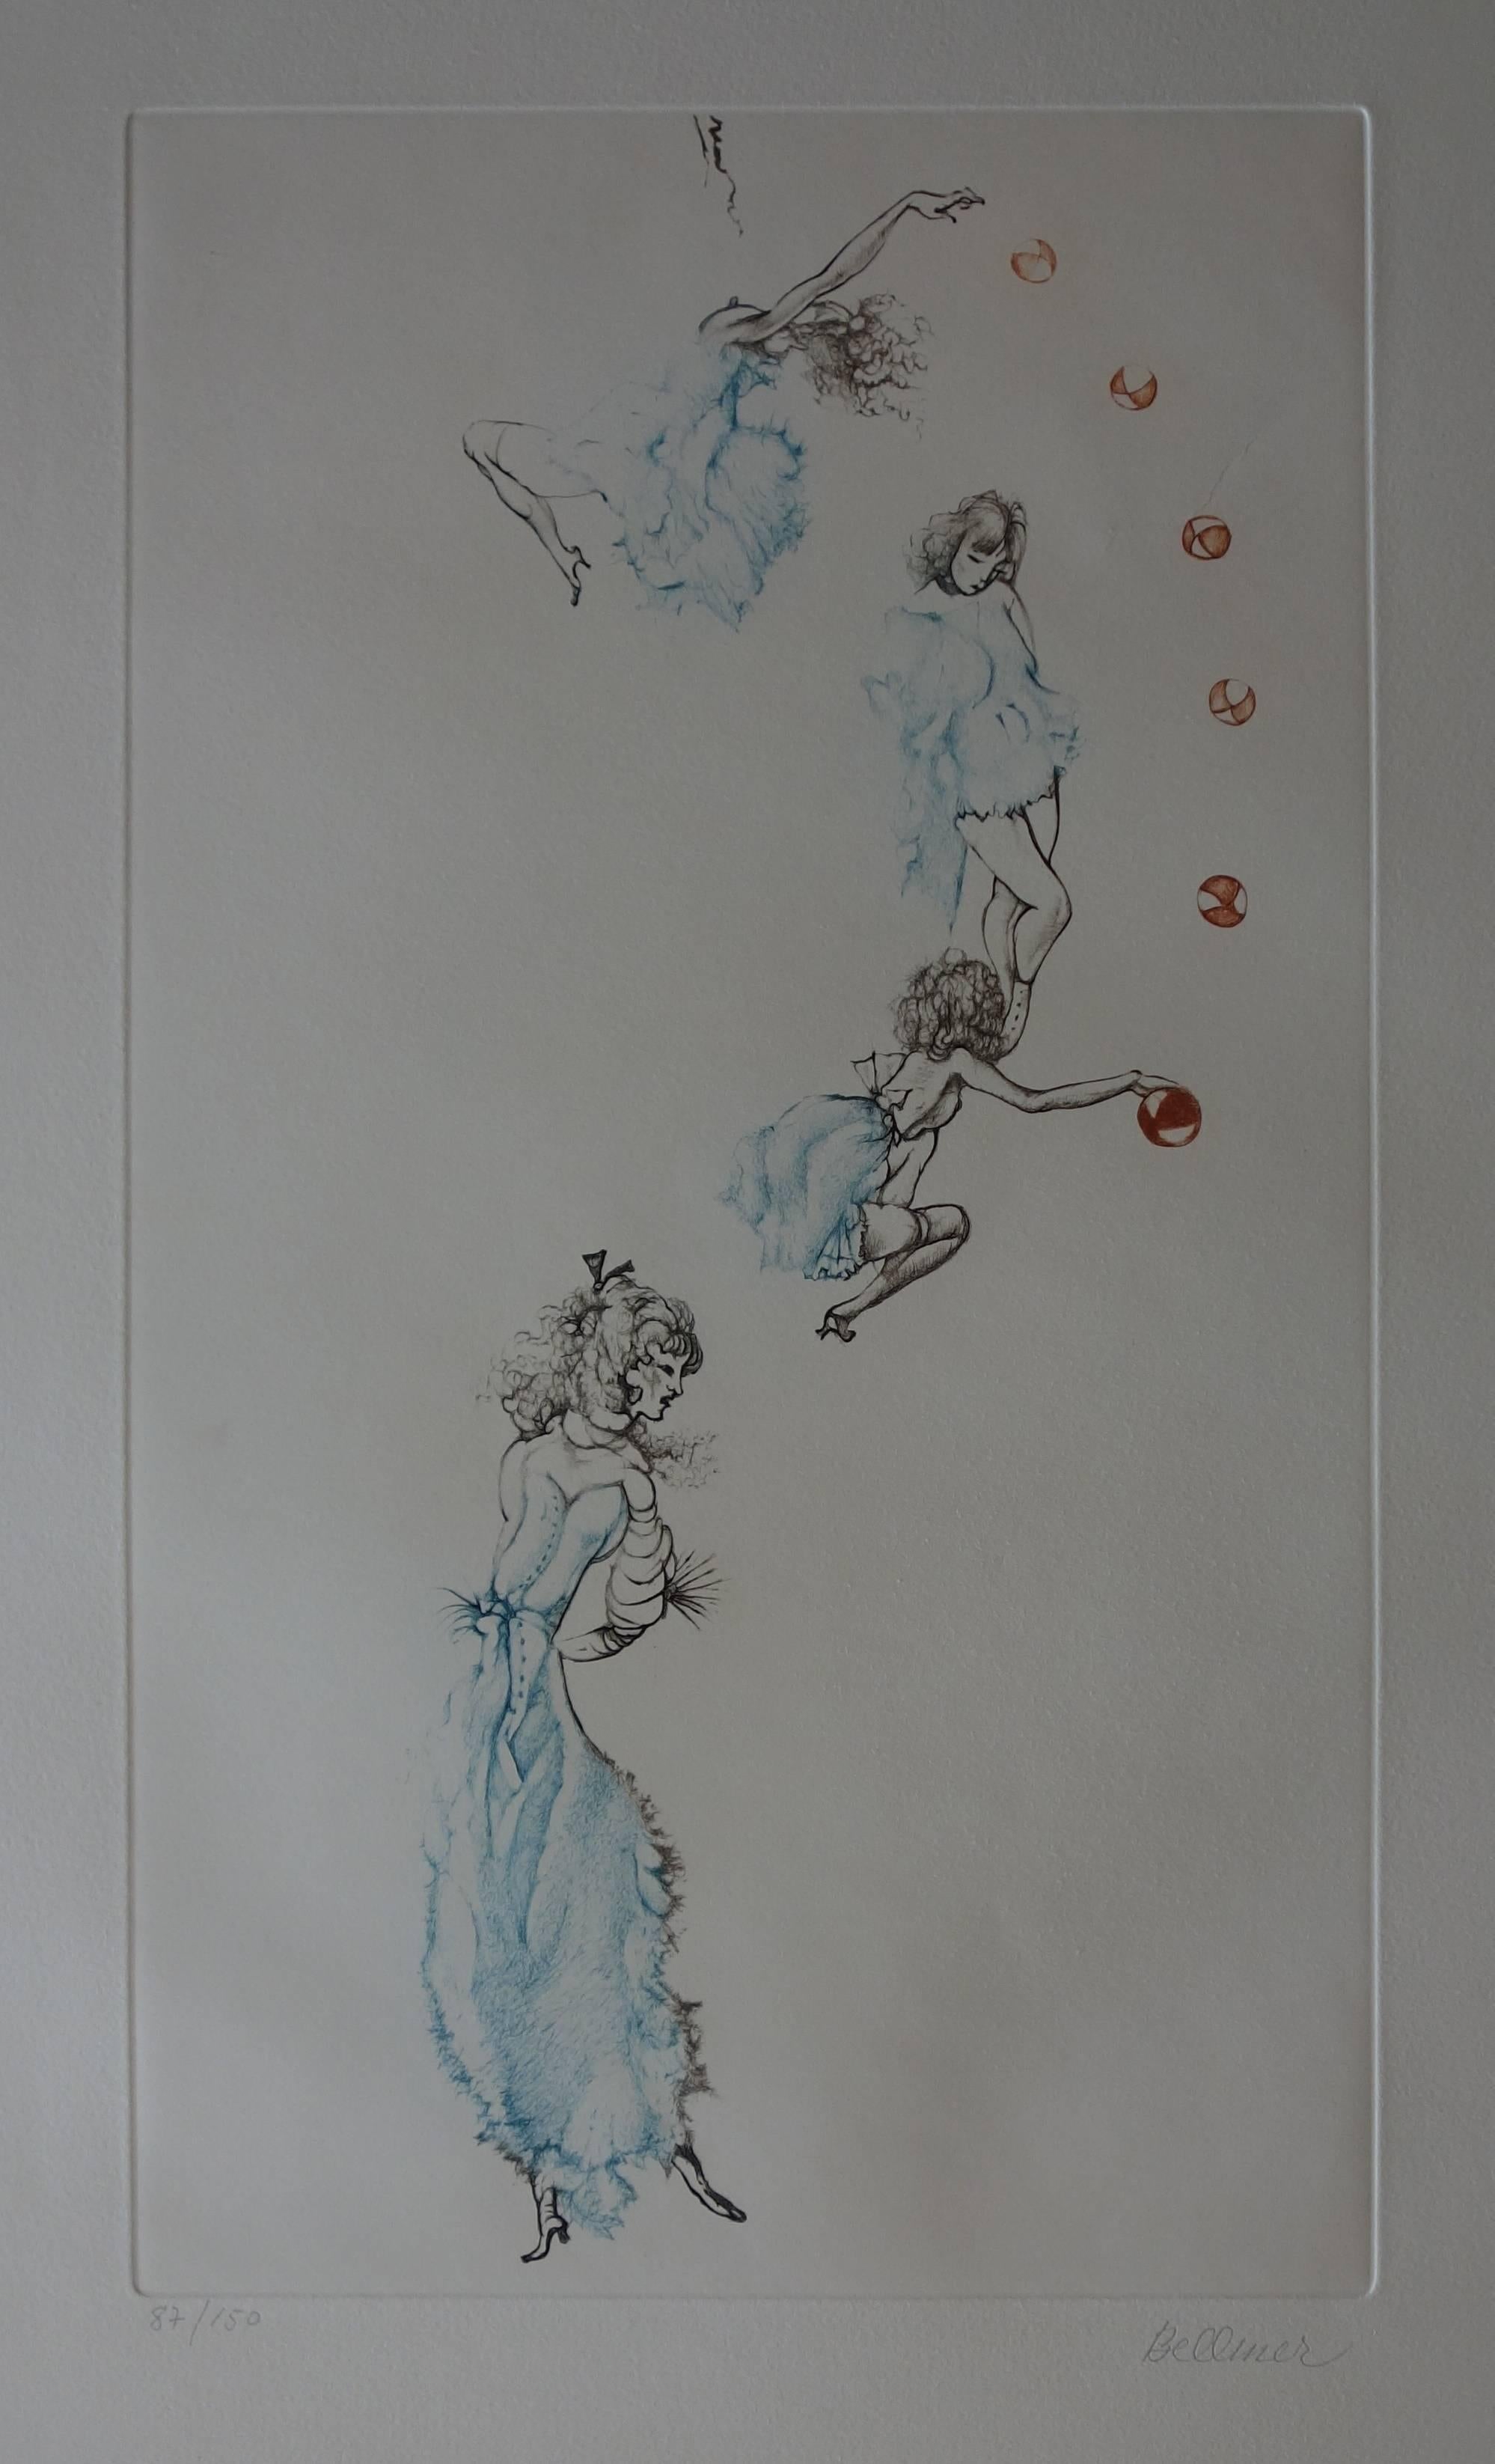 Hans Bellmer Figurative Print - Woman Playing With a Red Ball - Original handsigned etching - 150ex